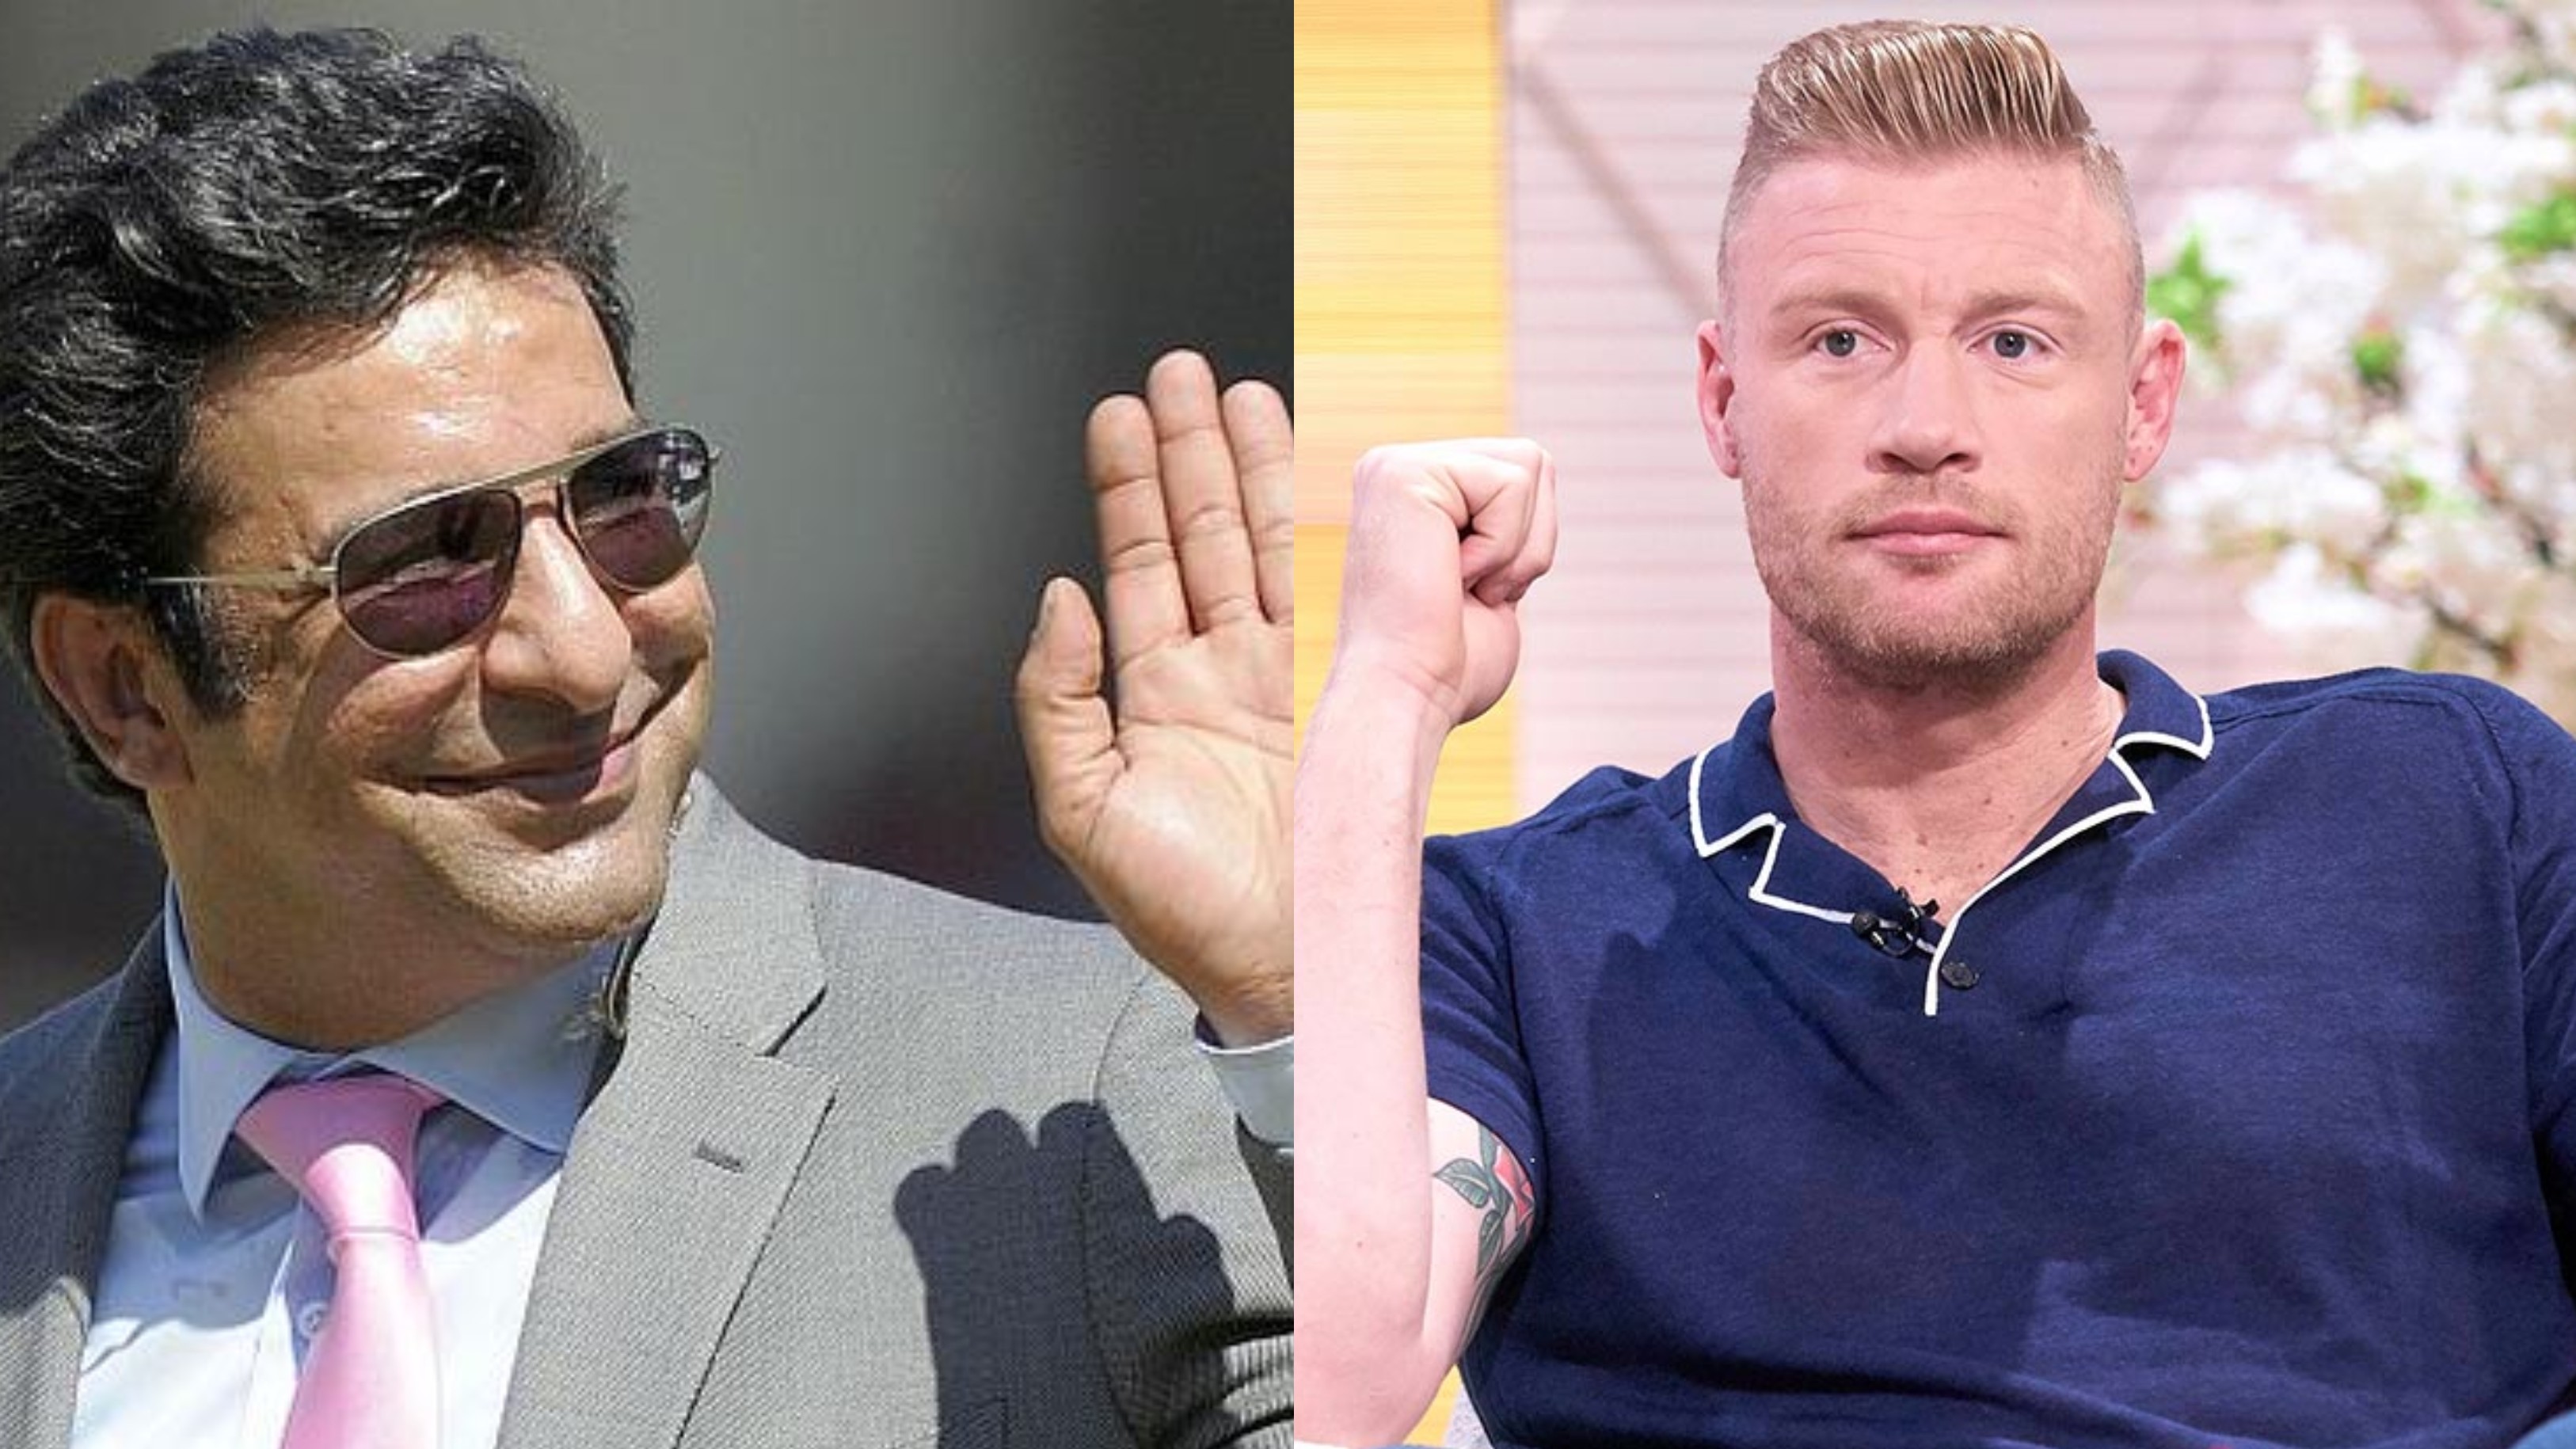 Wasim Akram responds after Andrew Flintoff thanks him for impact on his life and career